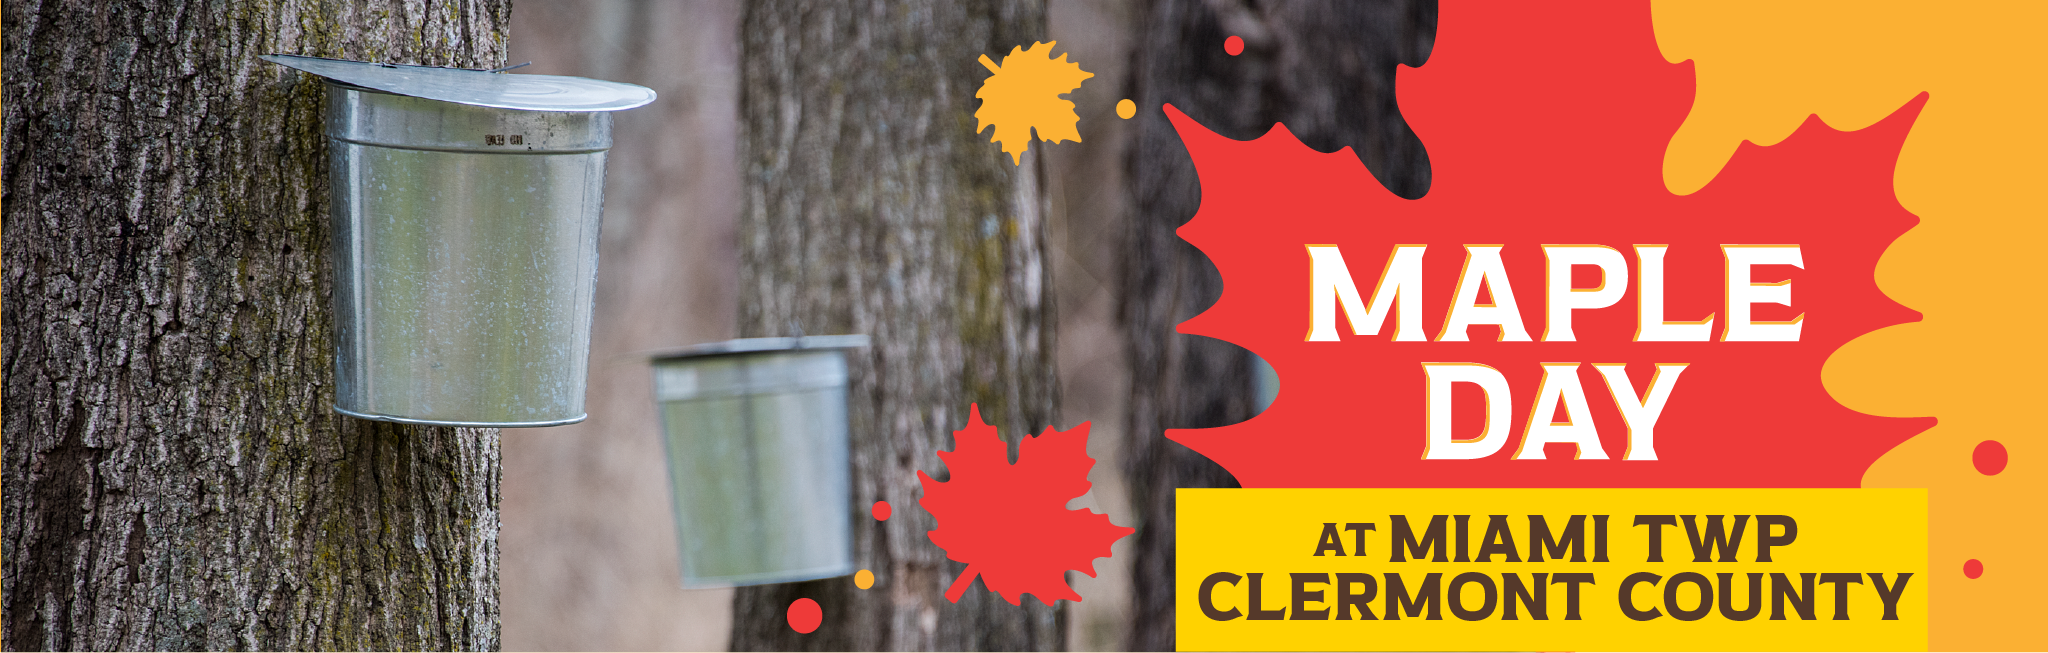 Maple Day at Greenacres Miami Township Clermont County event banner